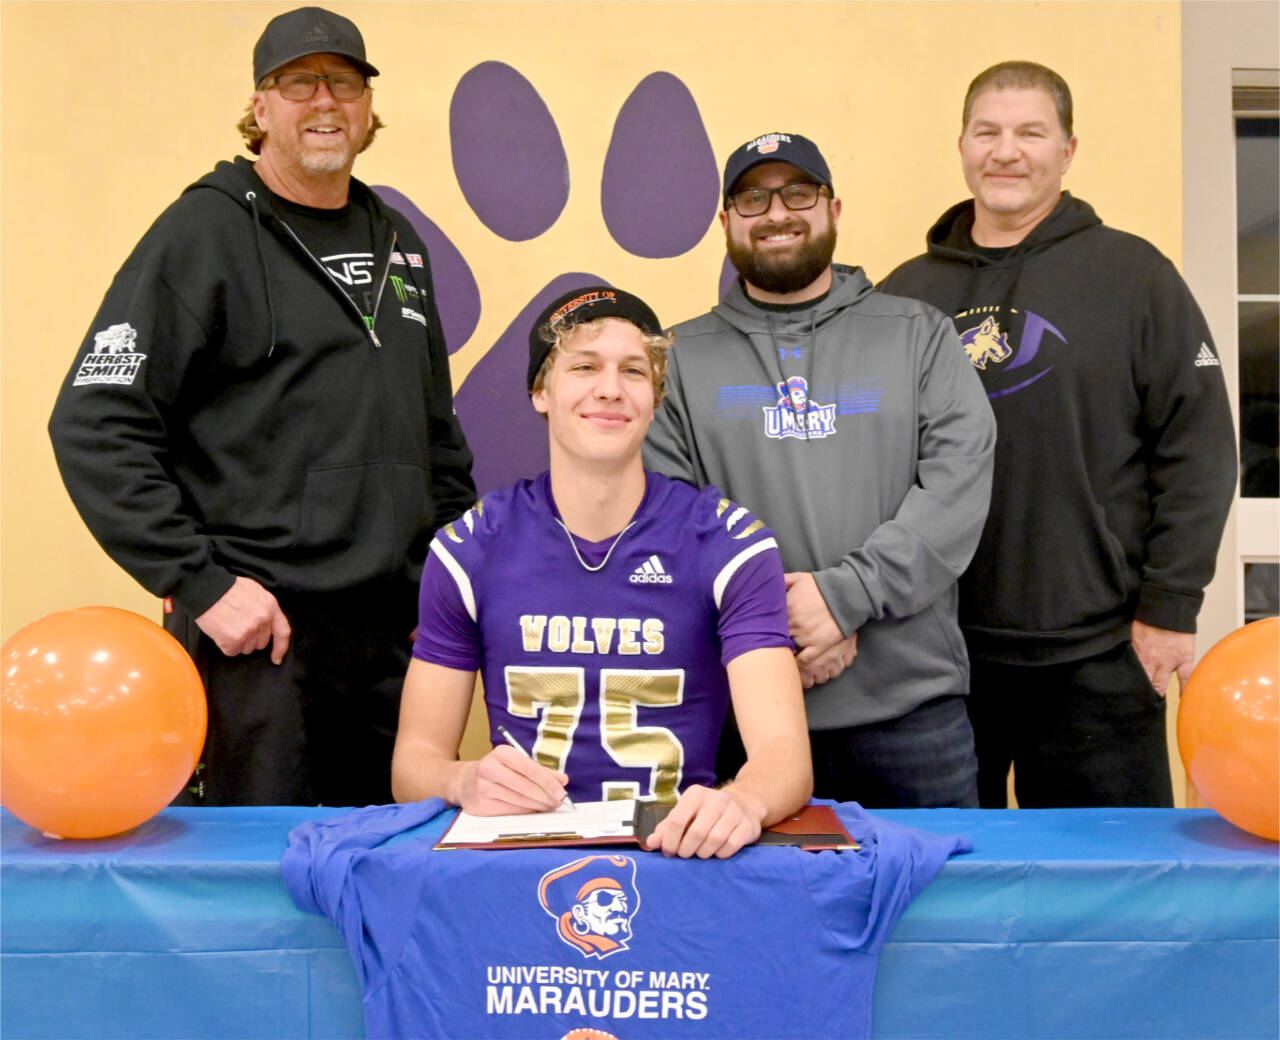 Sequim’s Jack Henninger signs a letter of intent to play football at the University of Mary (North Dakota). The all-Olympic League kicker plans to study occupational therapy and kick for the Marauders’ football squad. Behind him are, from left, soccer coach David Breckenridge, football special teams coach Cody Buckmaster and football head coach Erik Wiker. (Michael Dashiell/Olympic Peninsula News Group)